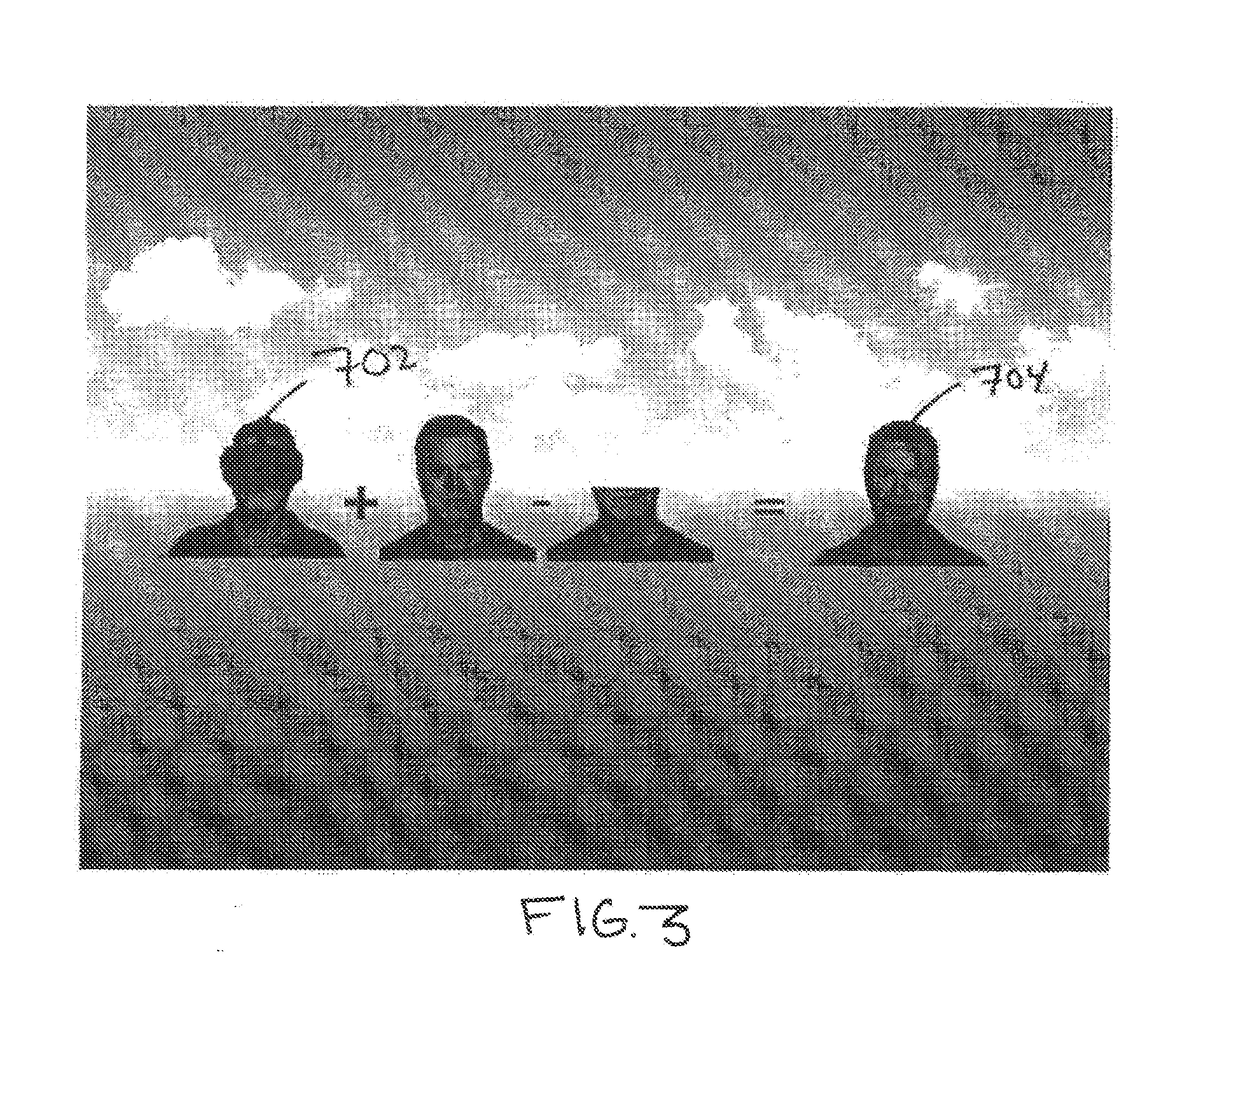 System and method for rendering virtual reality interactions